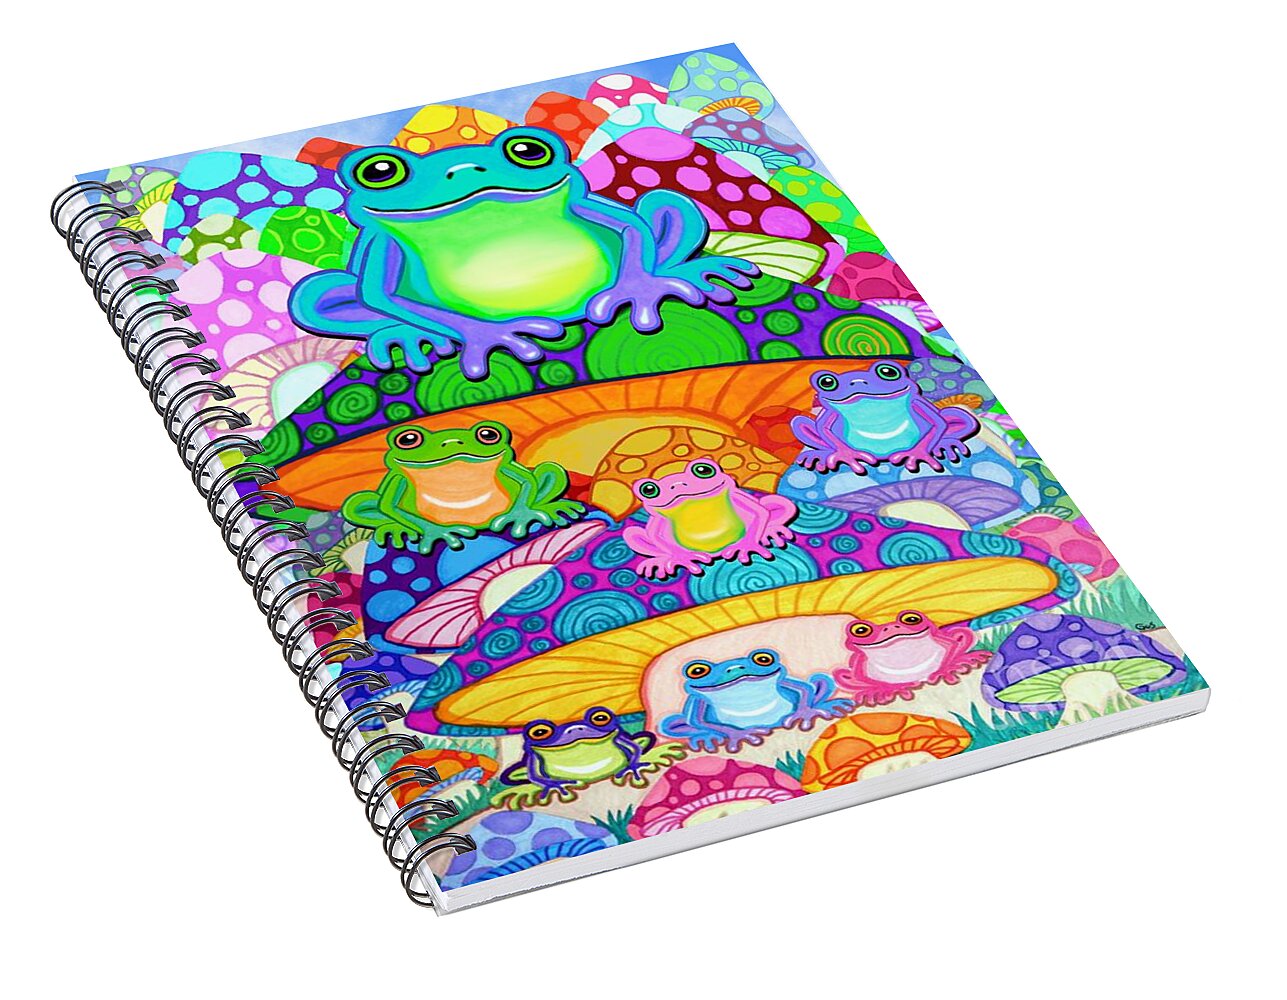 More Colorful Frogs on Colorful Magic Mushrooms Spiral Notebook for ...